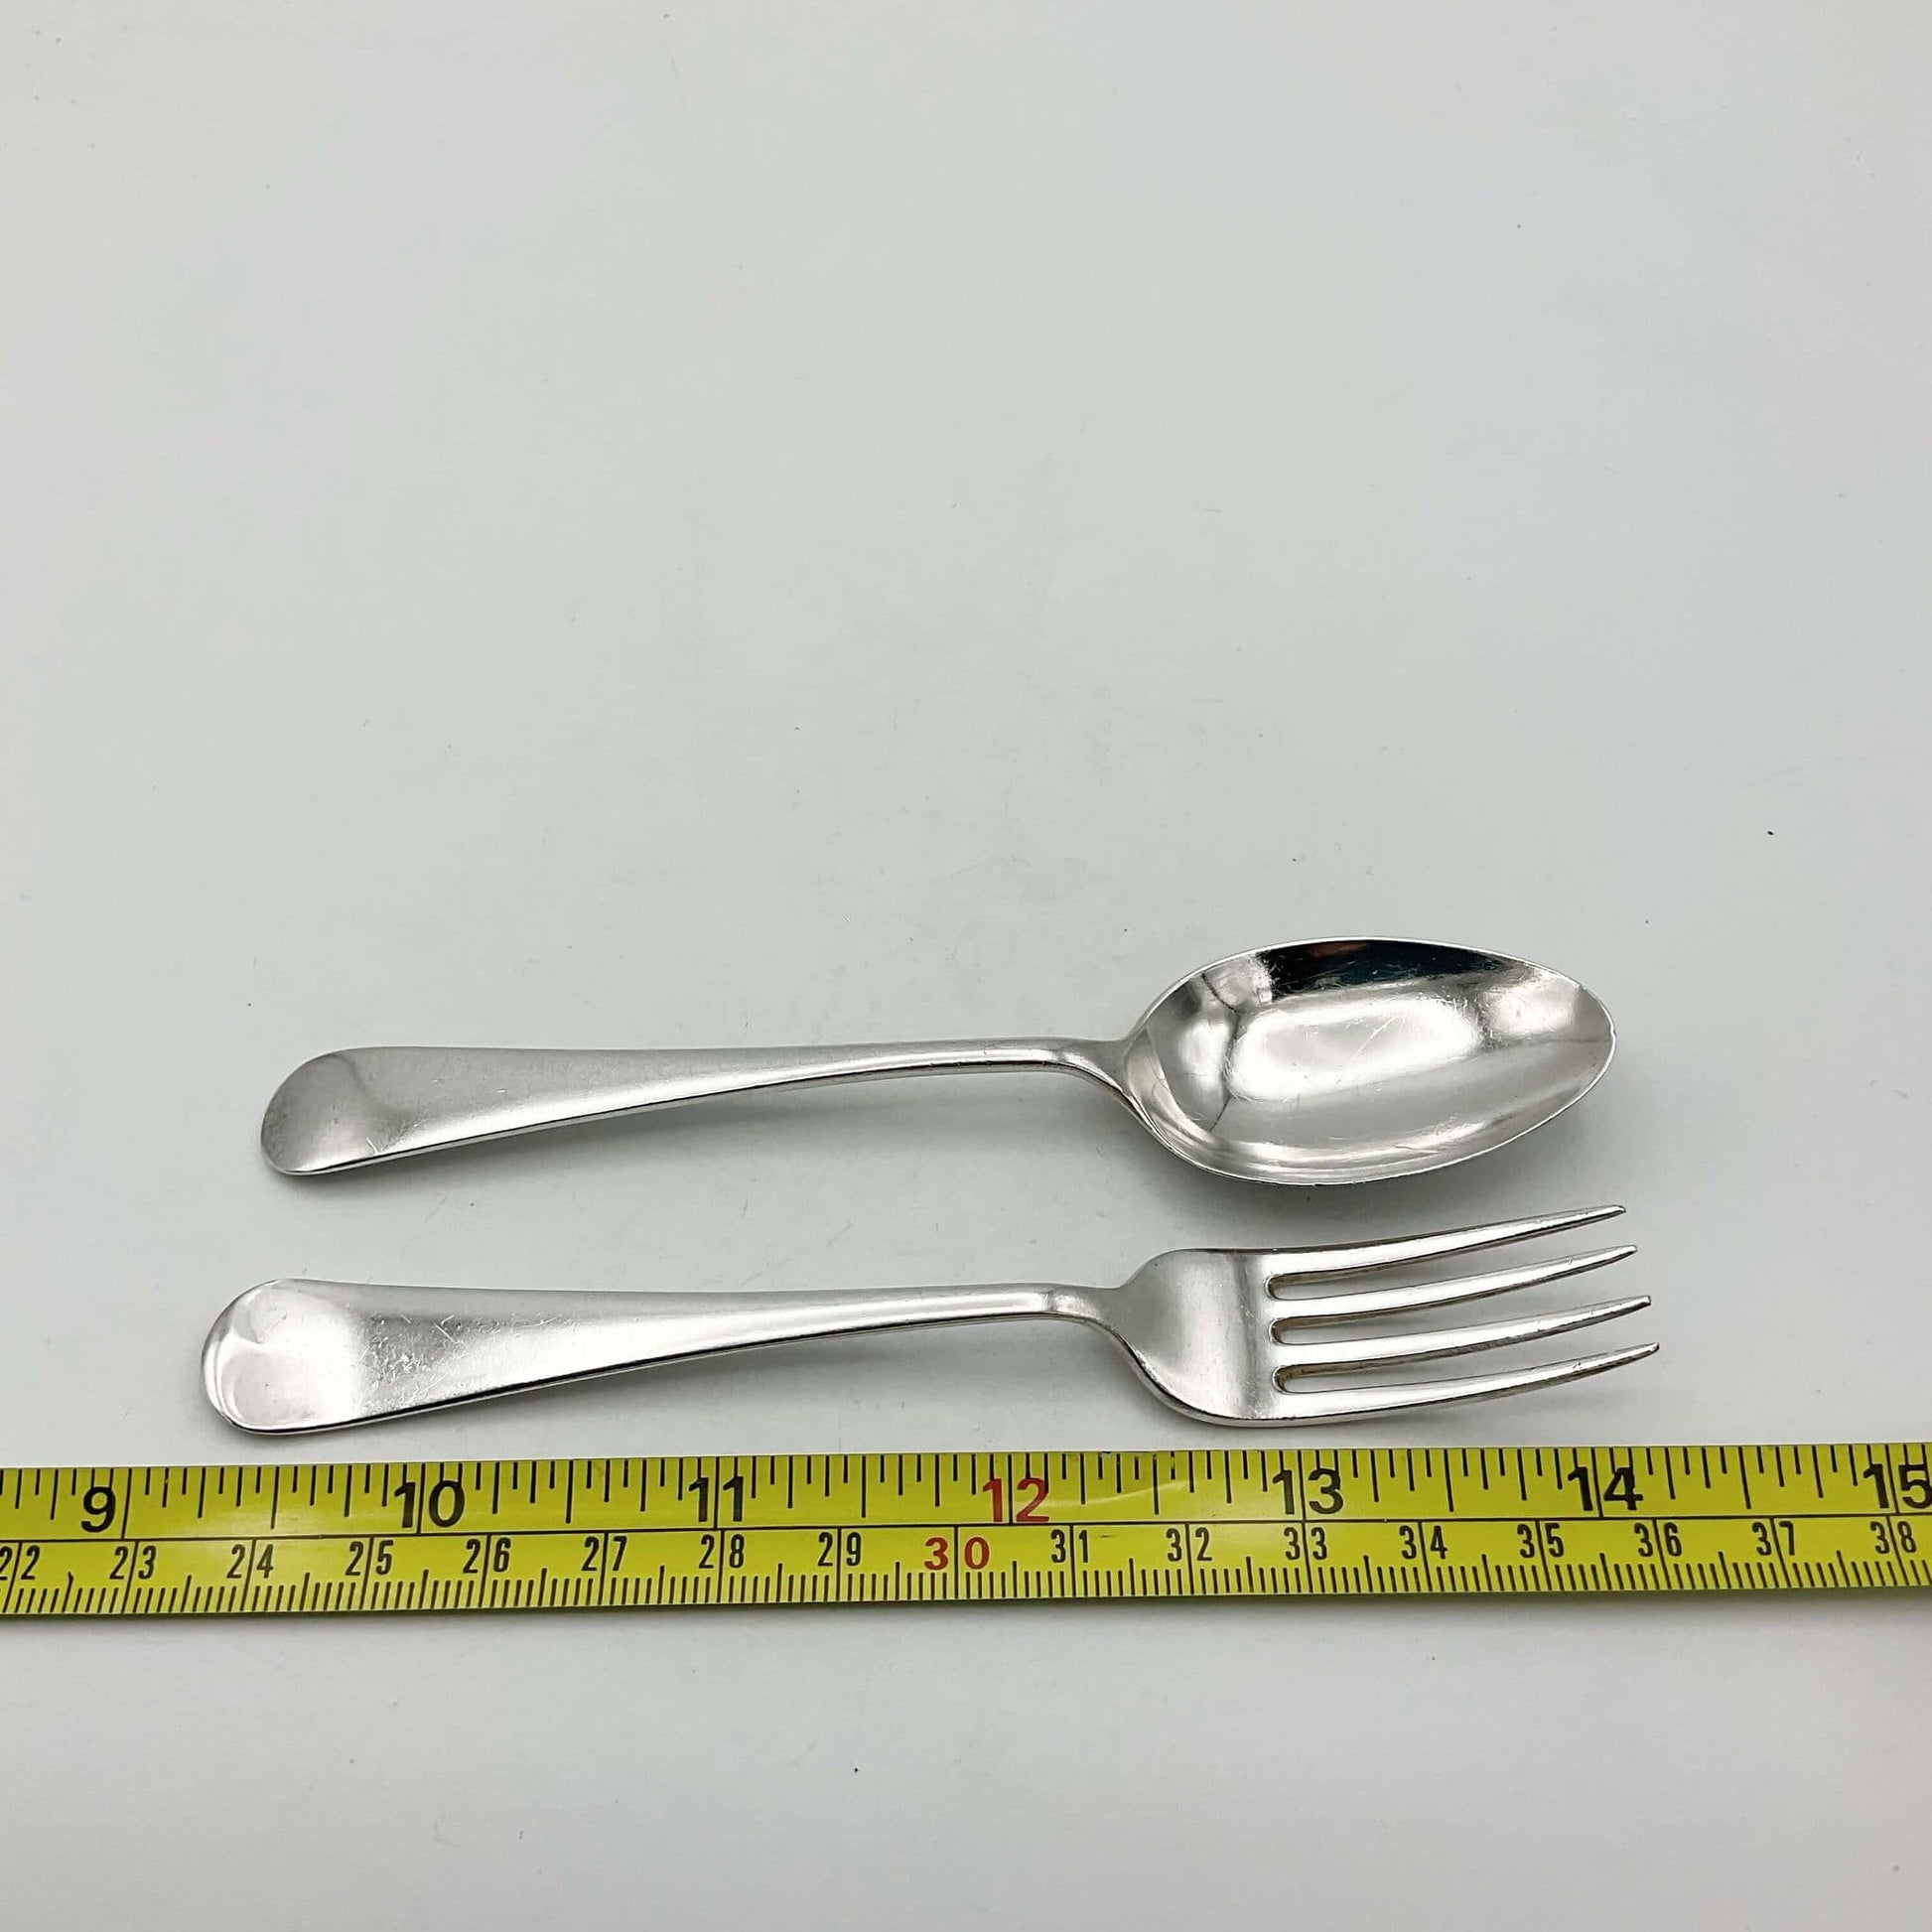 Silver spoon and fork next to tape measure showing they measure approximately 13cm in length